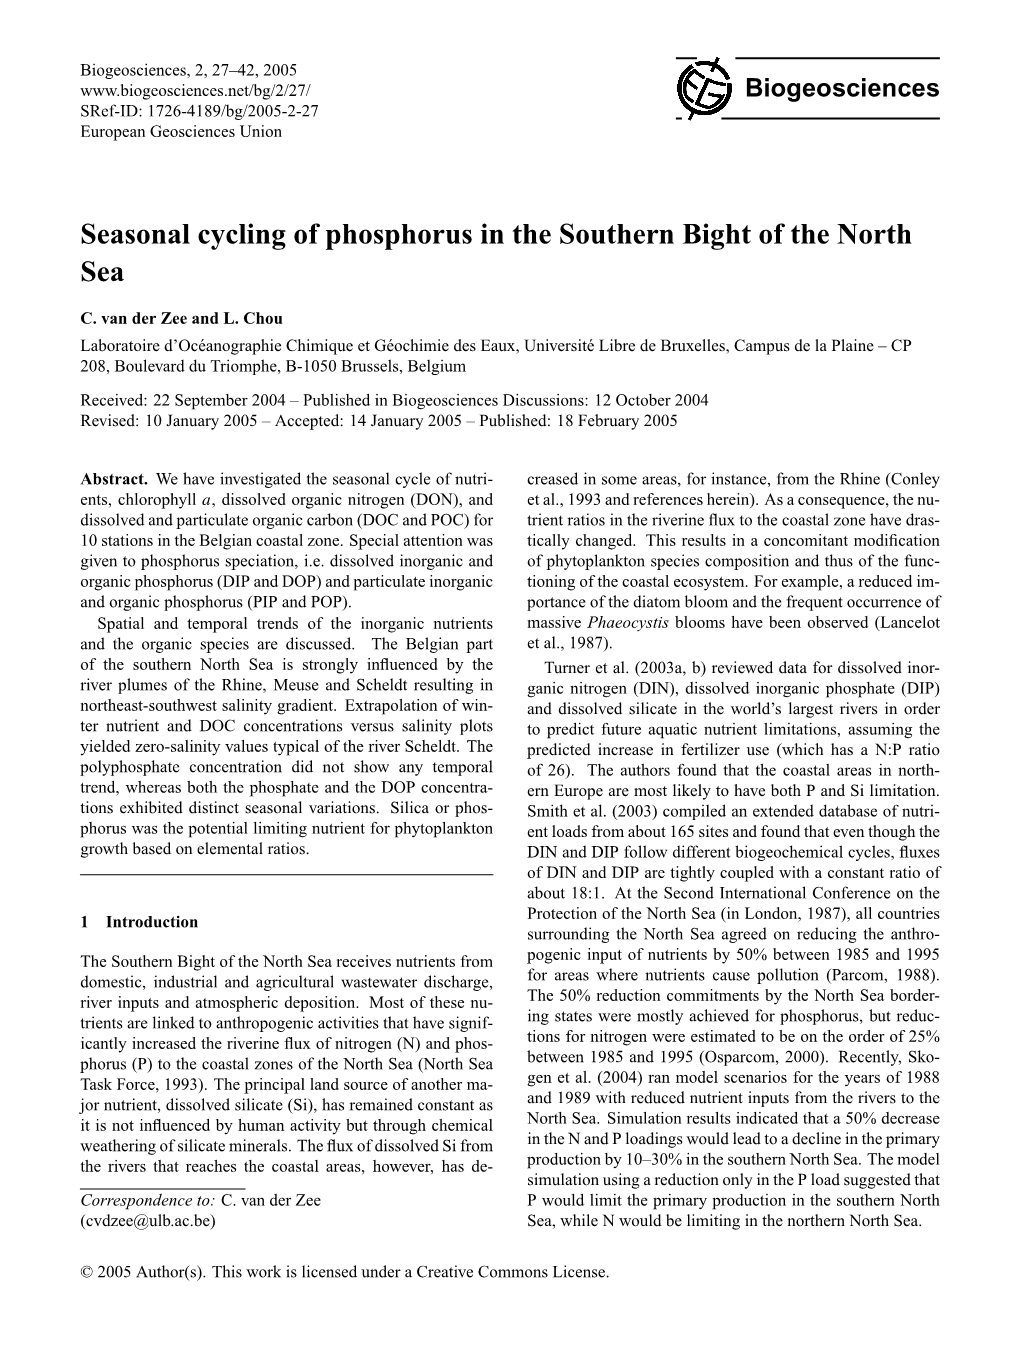 Seasonal Cycling of Phosphorus in the Southern Bight of the North Sea